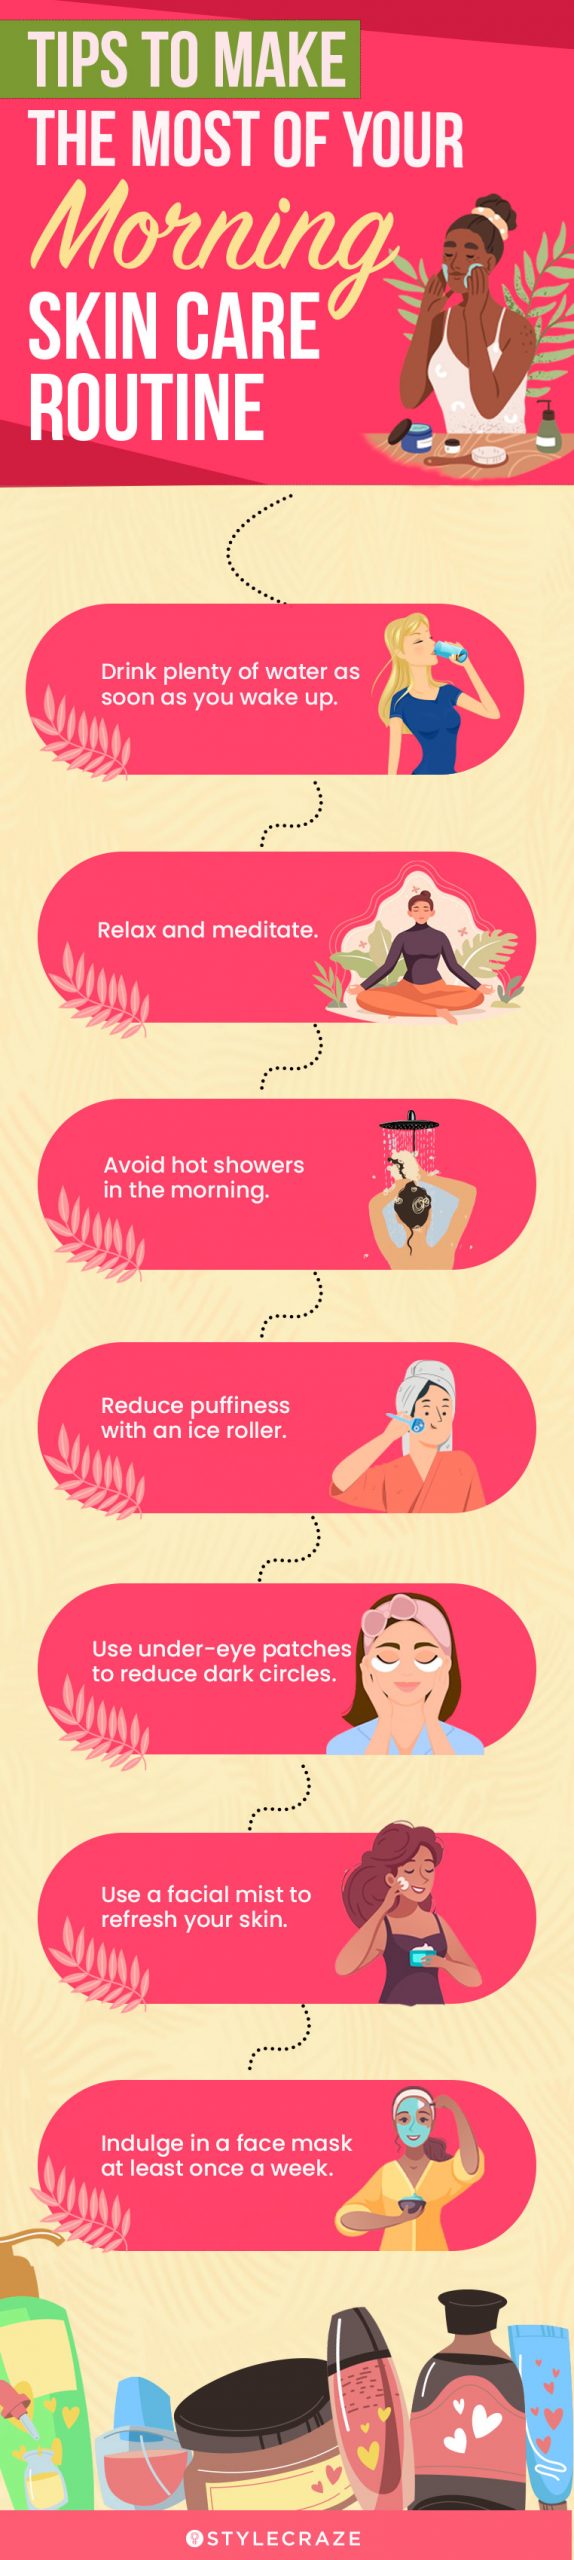 tips to make the most of your morning skin care routine [infographic]